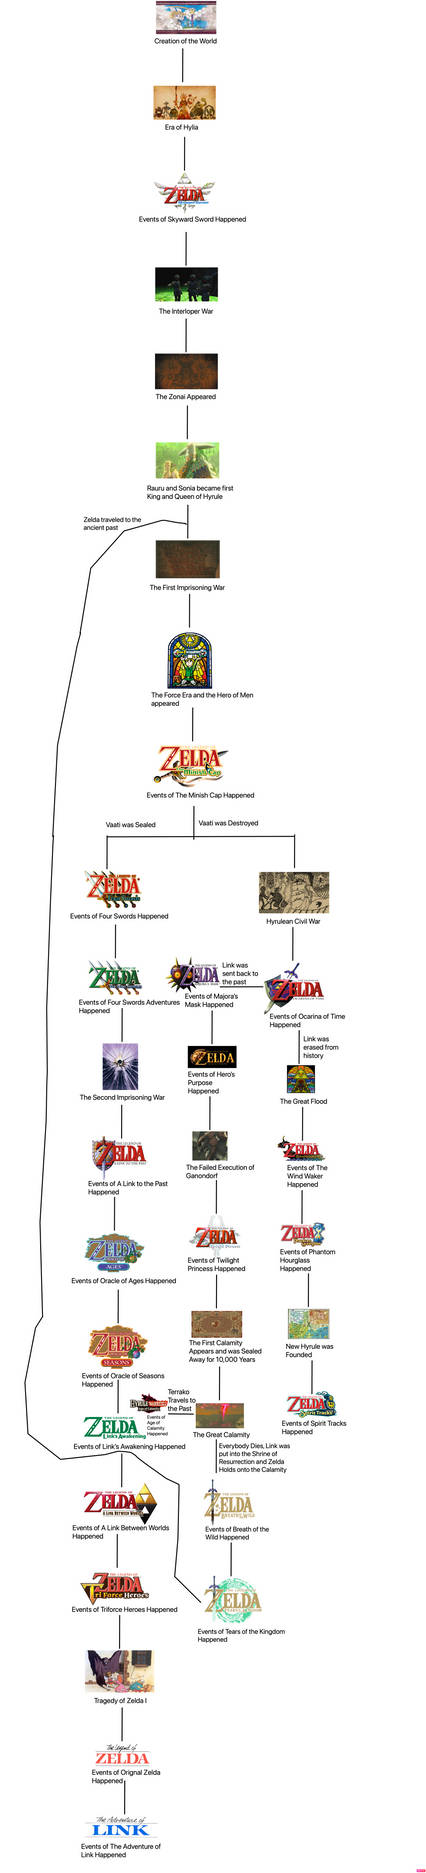 My Version of the Zelda Timeline by cameron33268110